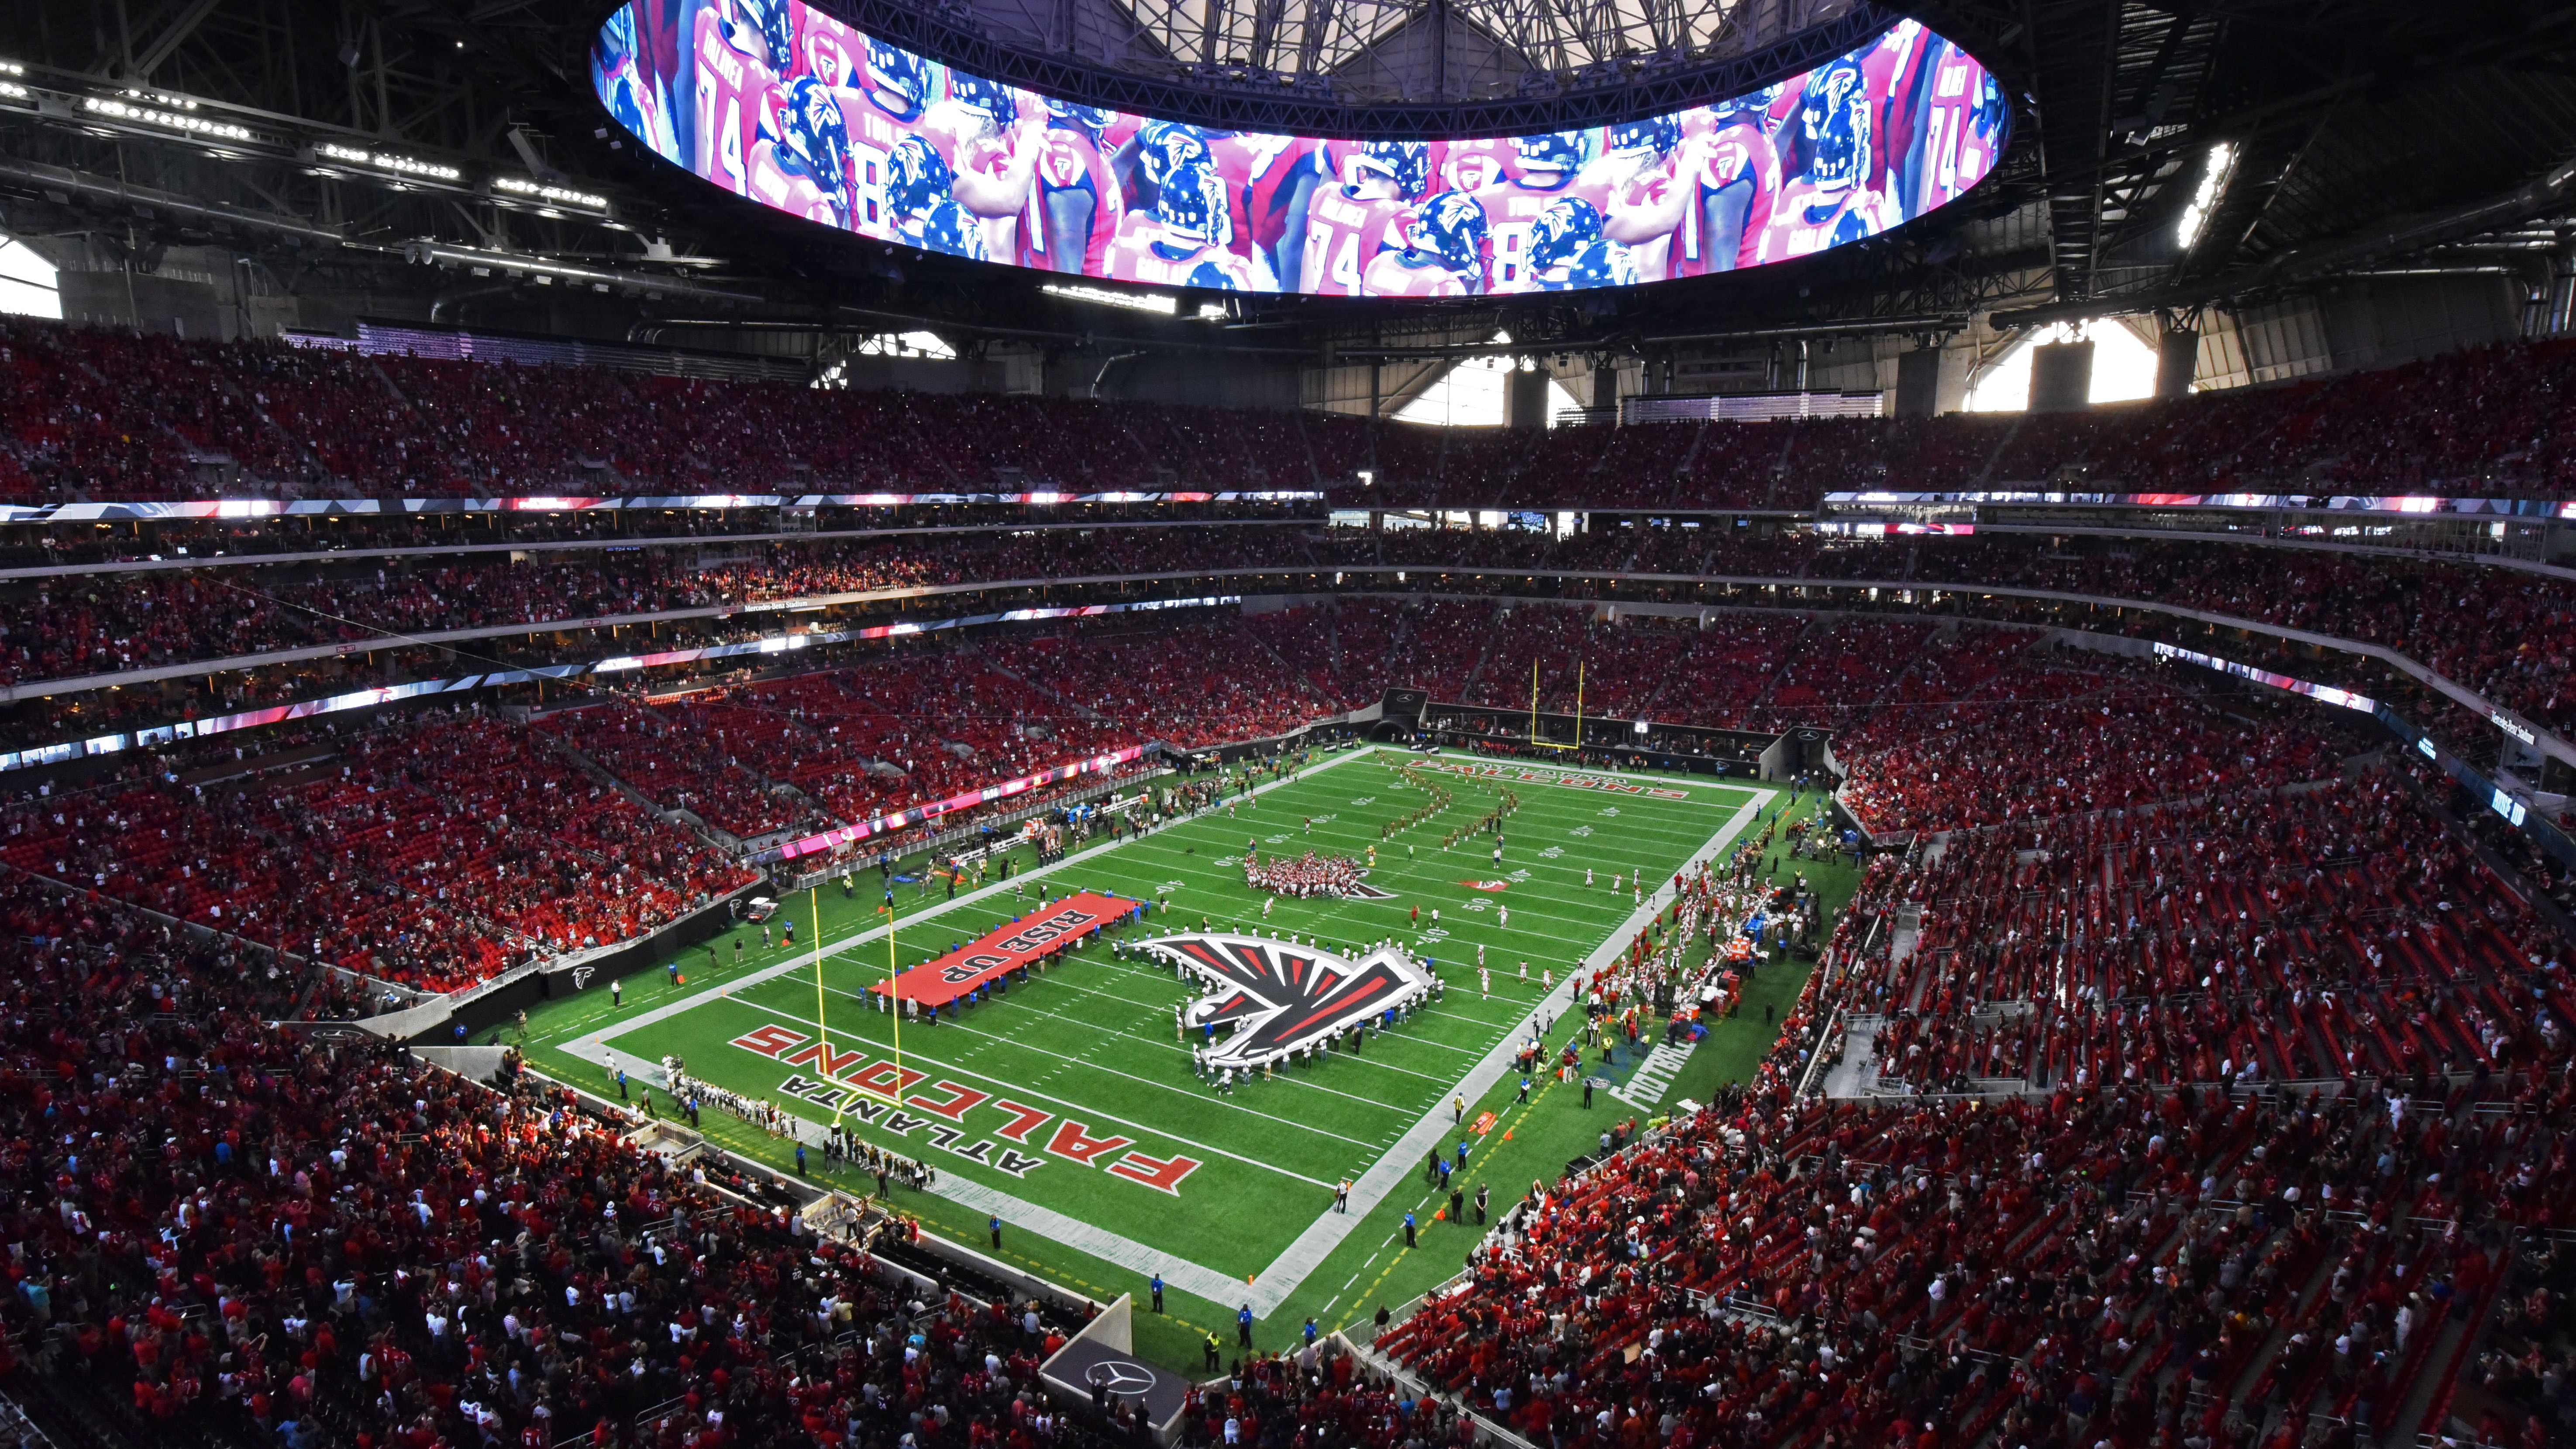 Falcons offer credits or refunds to season ticket holders